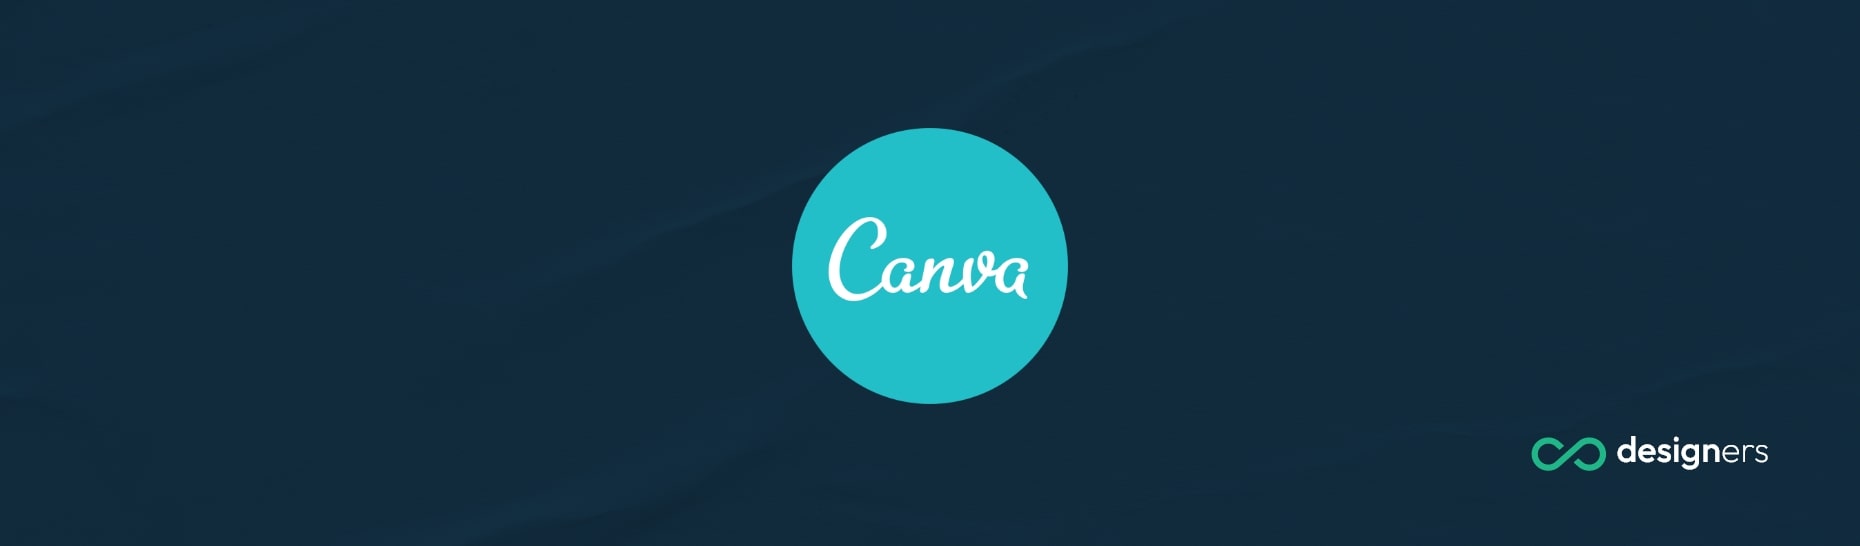 How Do I Filter Free Images on Canva?